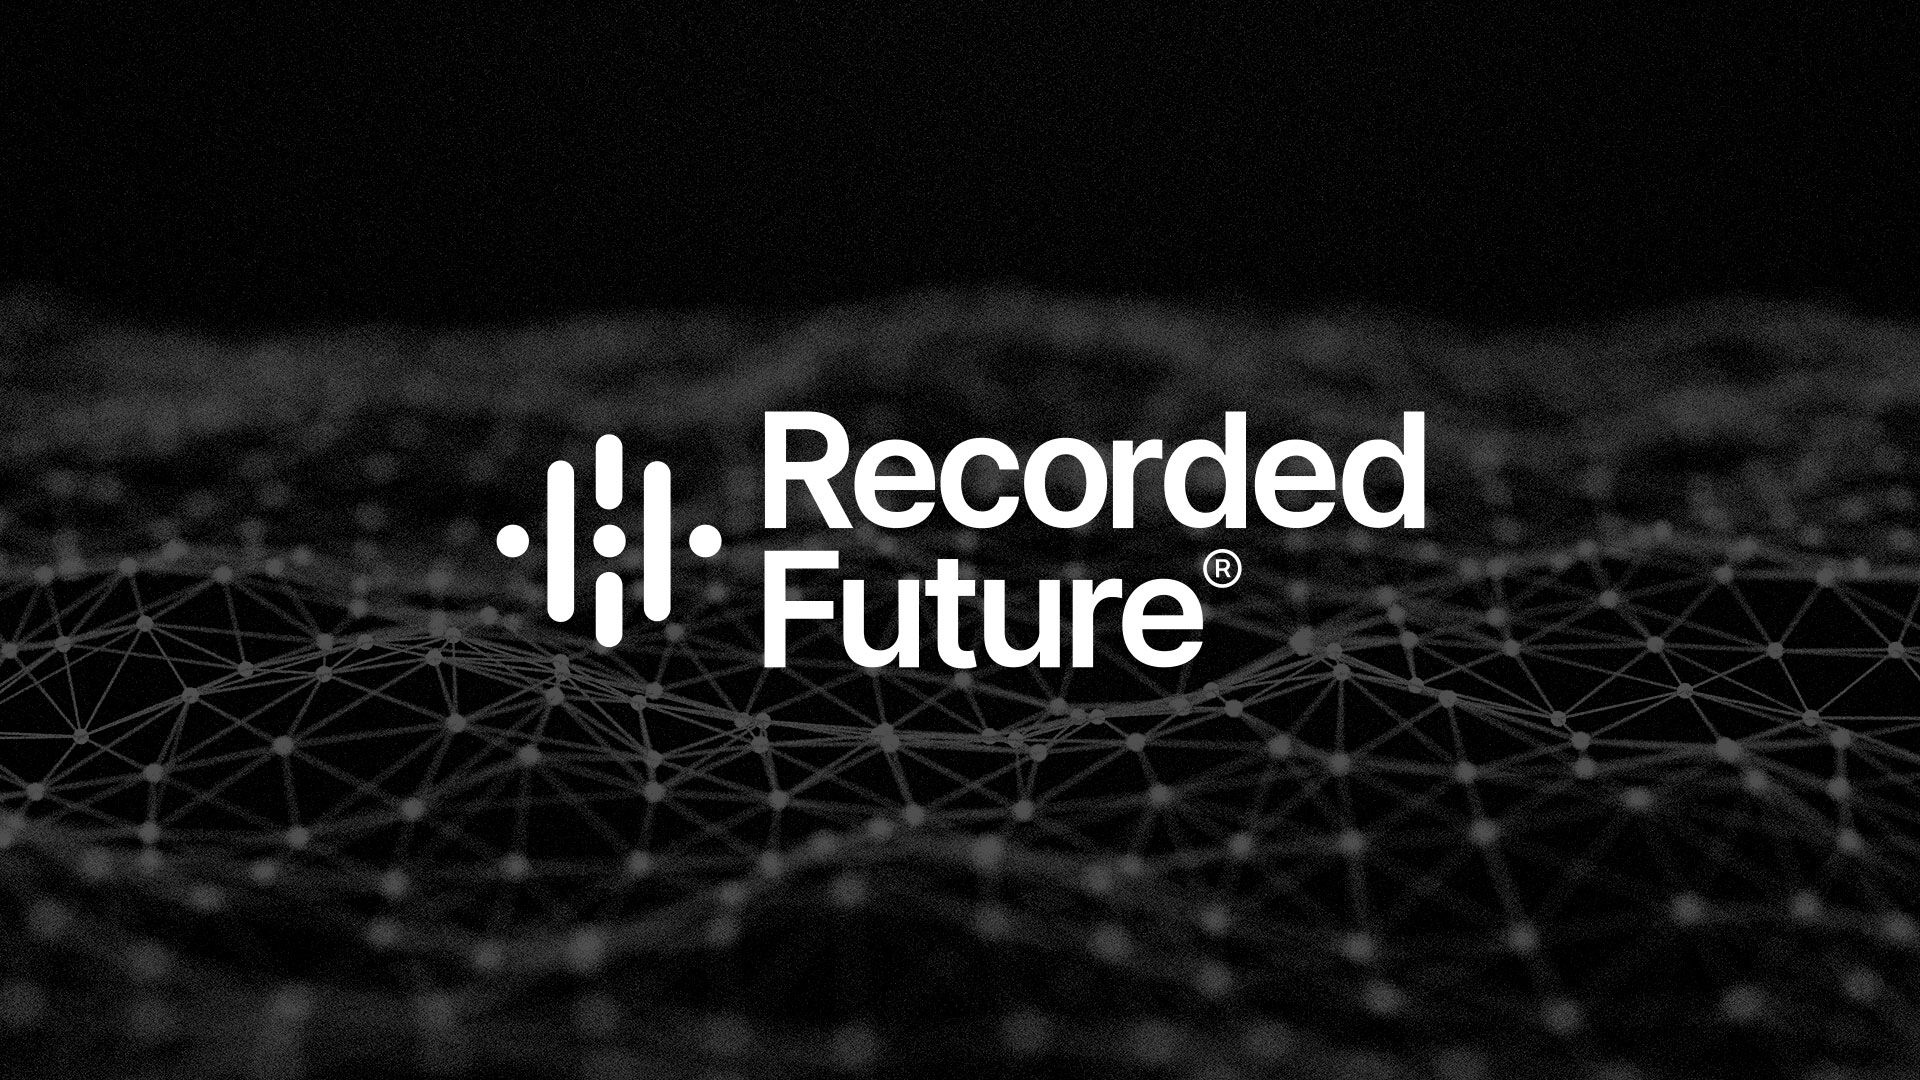 Recorded Future Unveils Third-Party Risk Intelligence for Comprehensive View of Cyber Threats